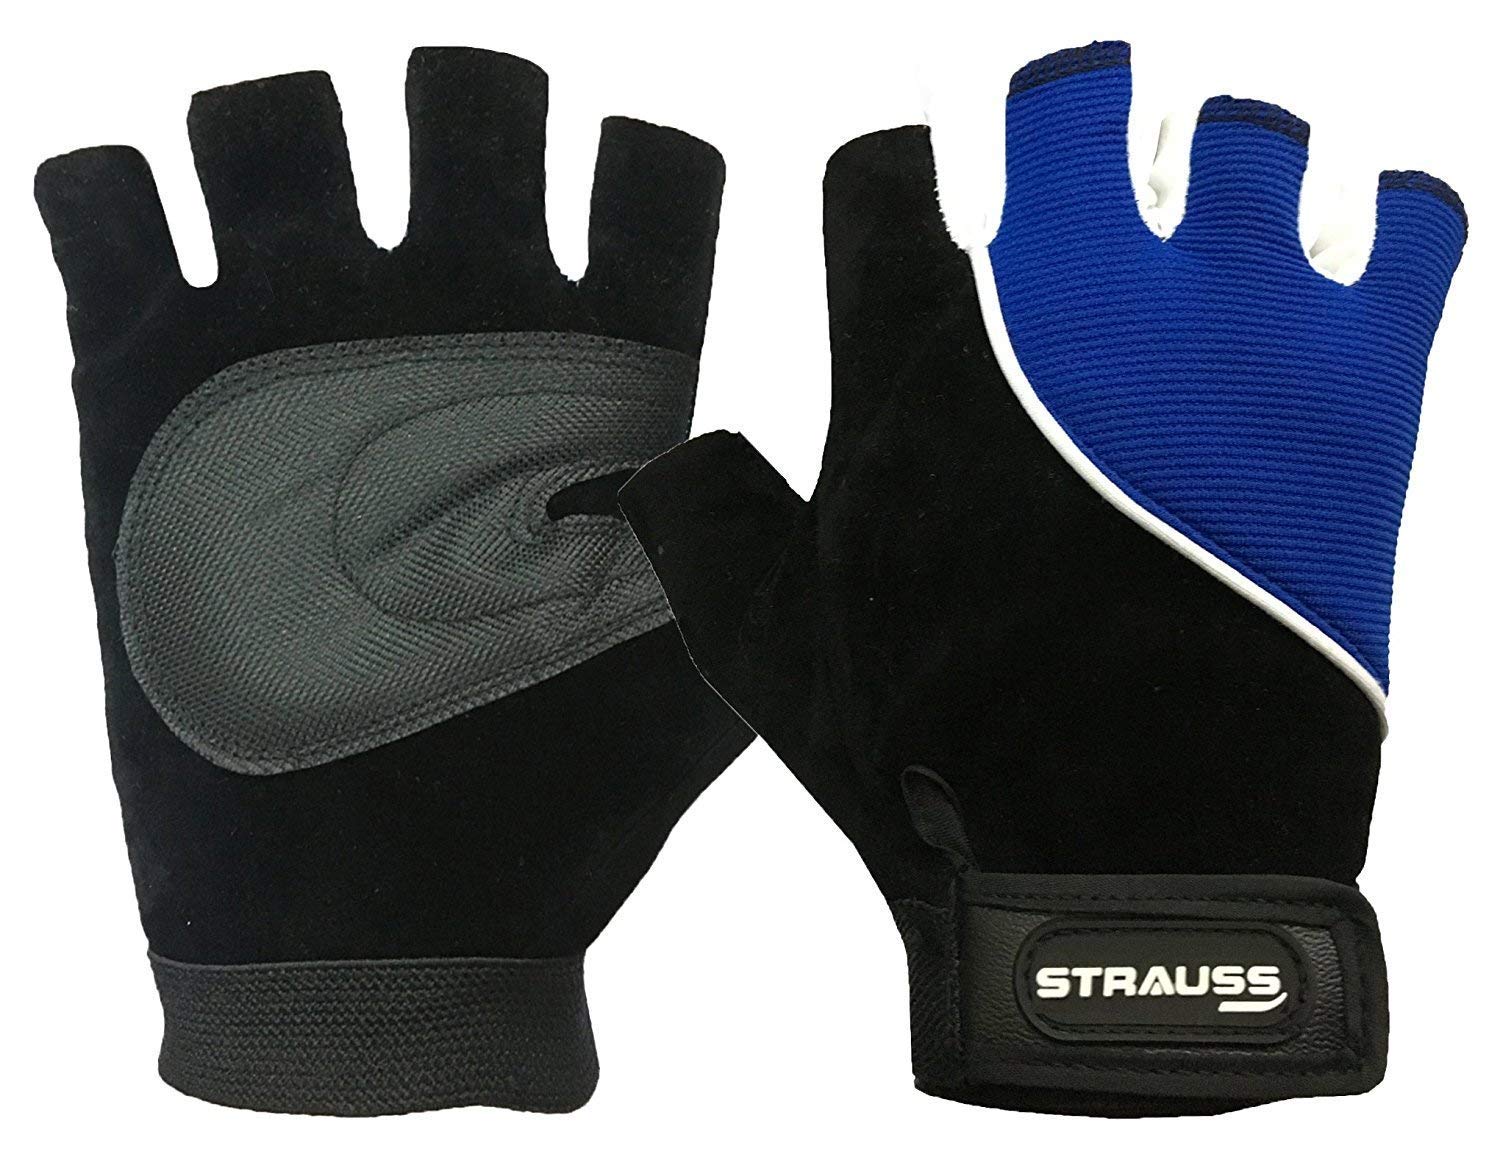 Strauss Cycling Gloves, Large, (Black/Blue)